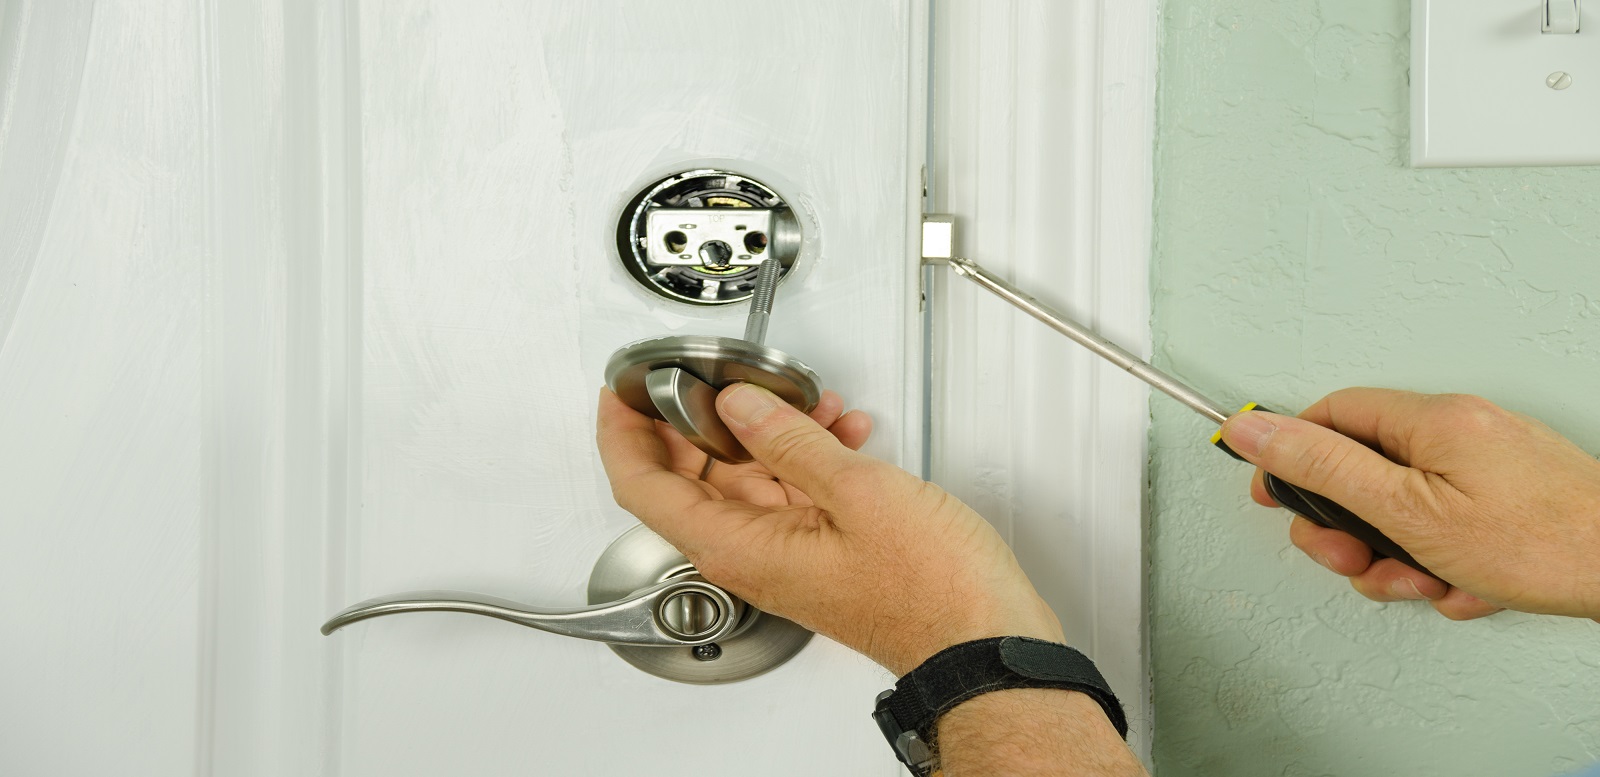 Importance of Locksmith Services in Cuckfield